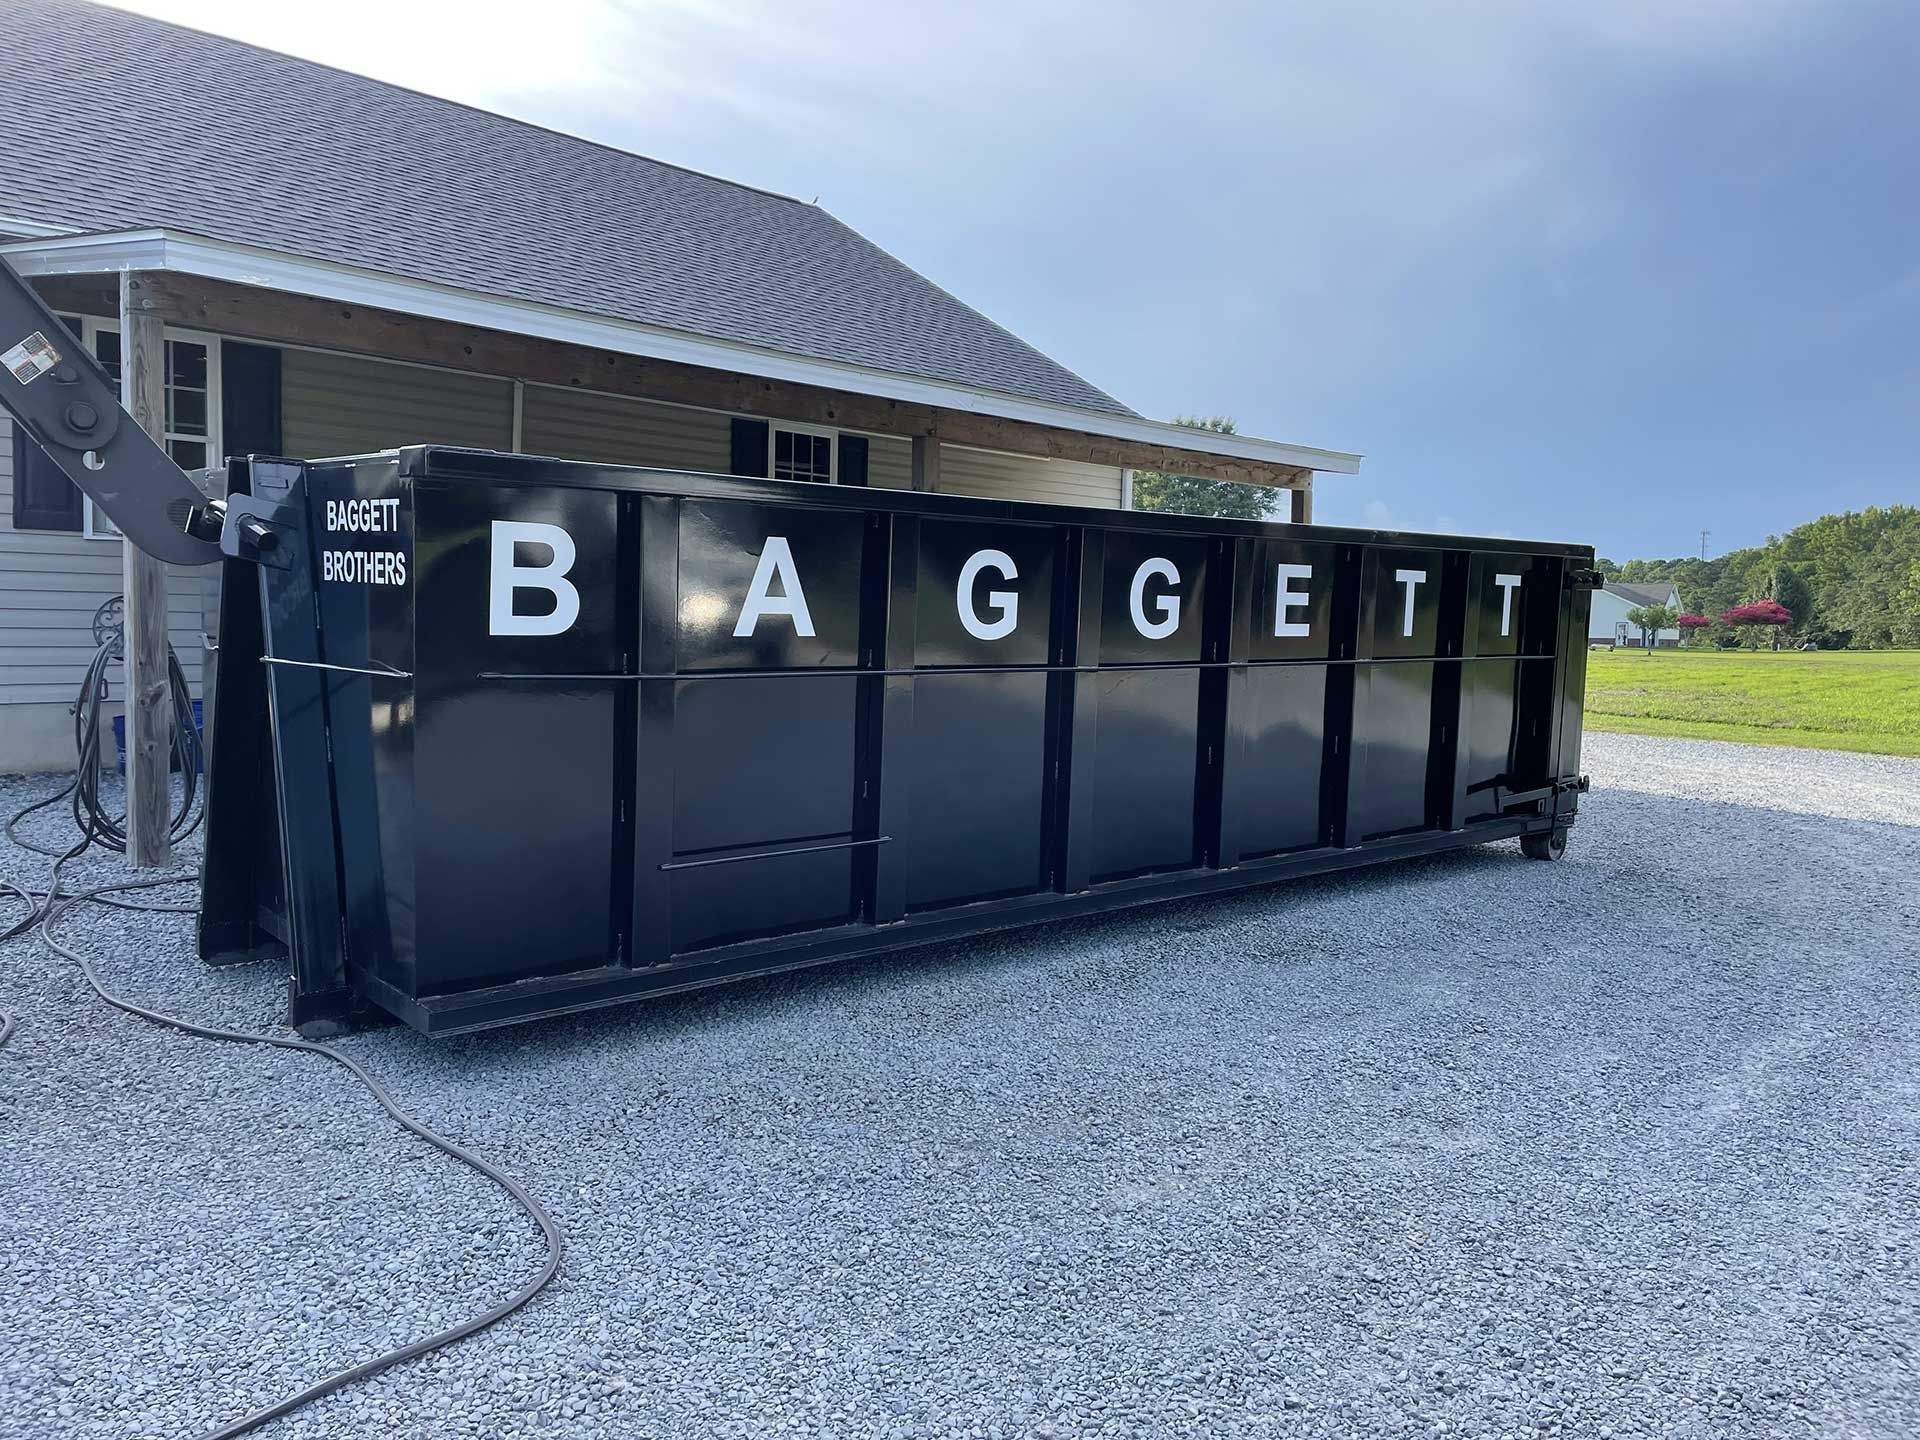 BAGGETT BROTHERS CONTRACTING